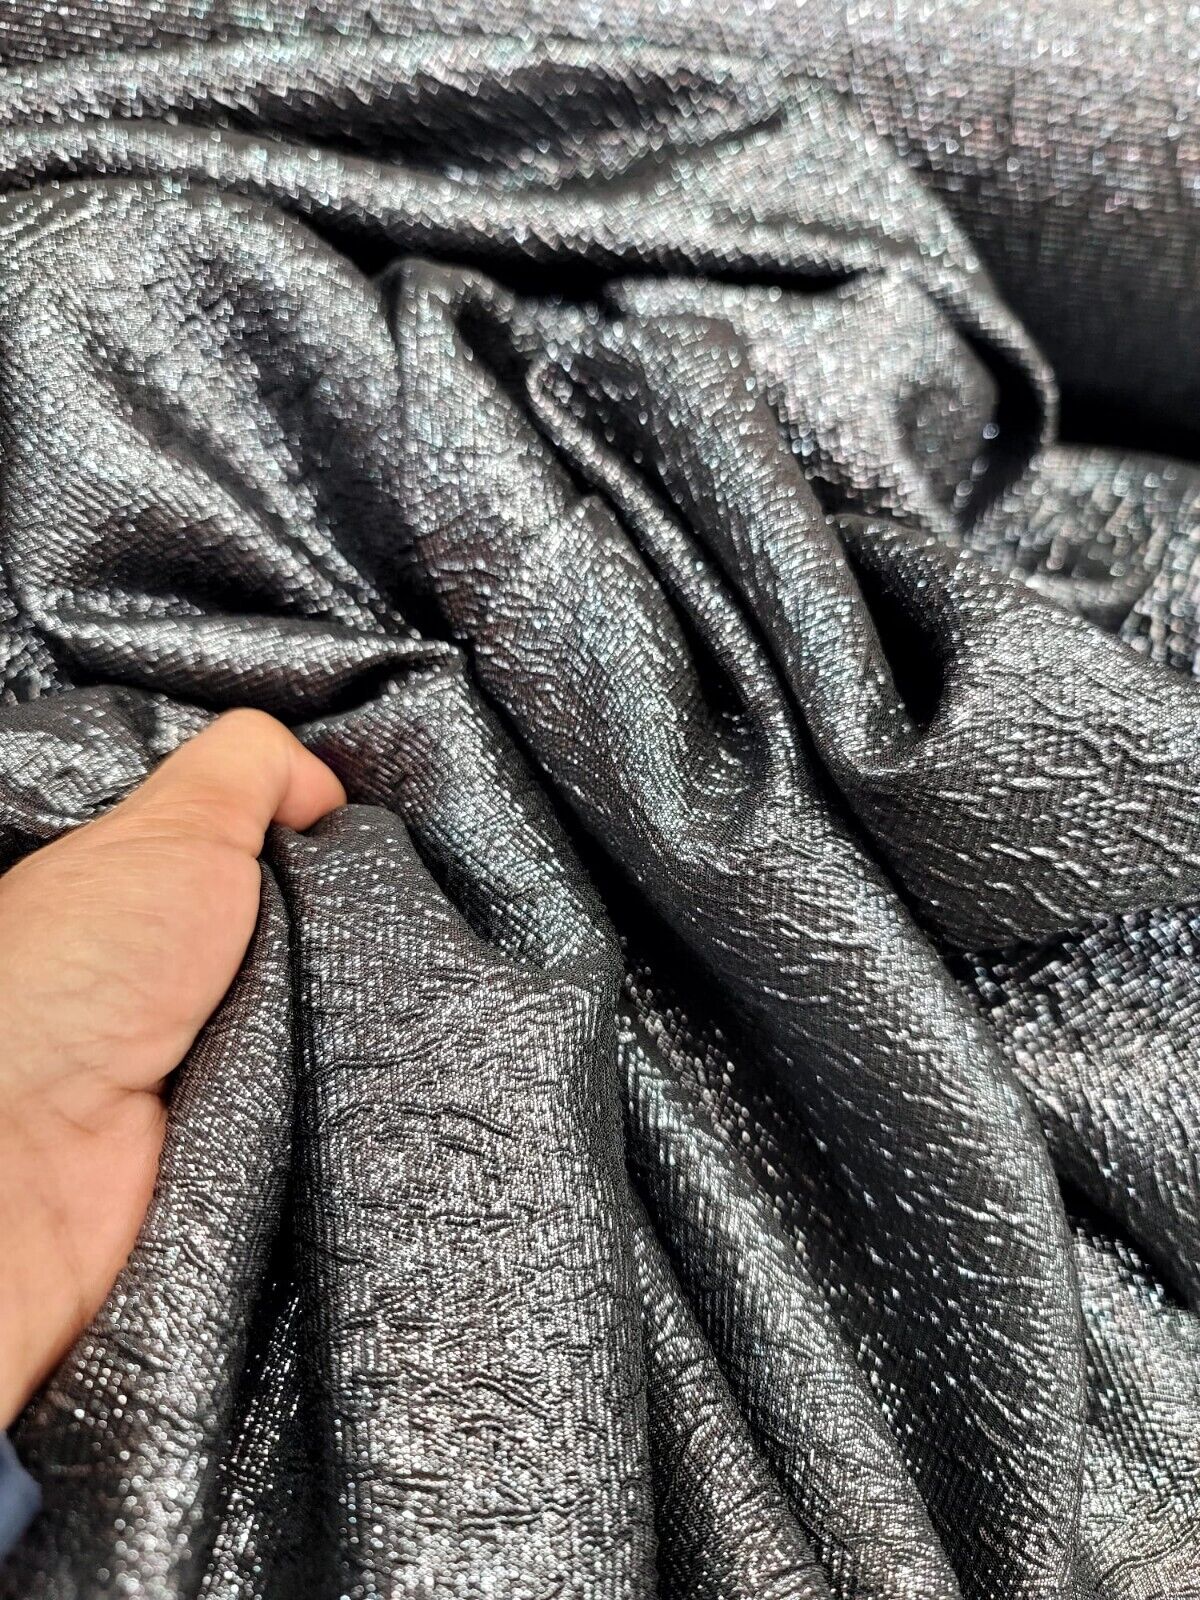 Charcoal Gray Metallic Brocade Jacquard Fabric - Sold by the Yard - Dress Gown Embossed